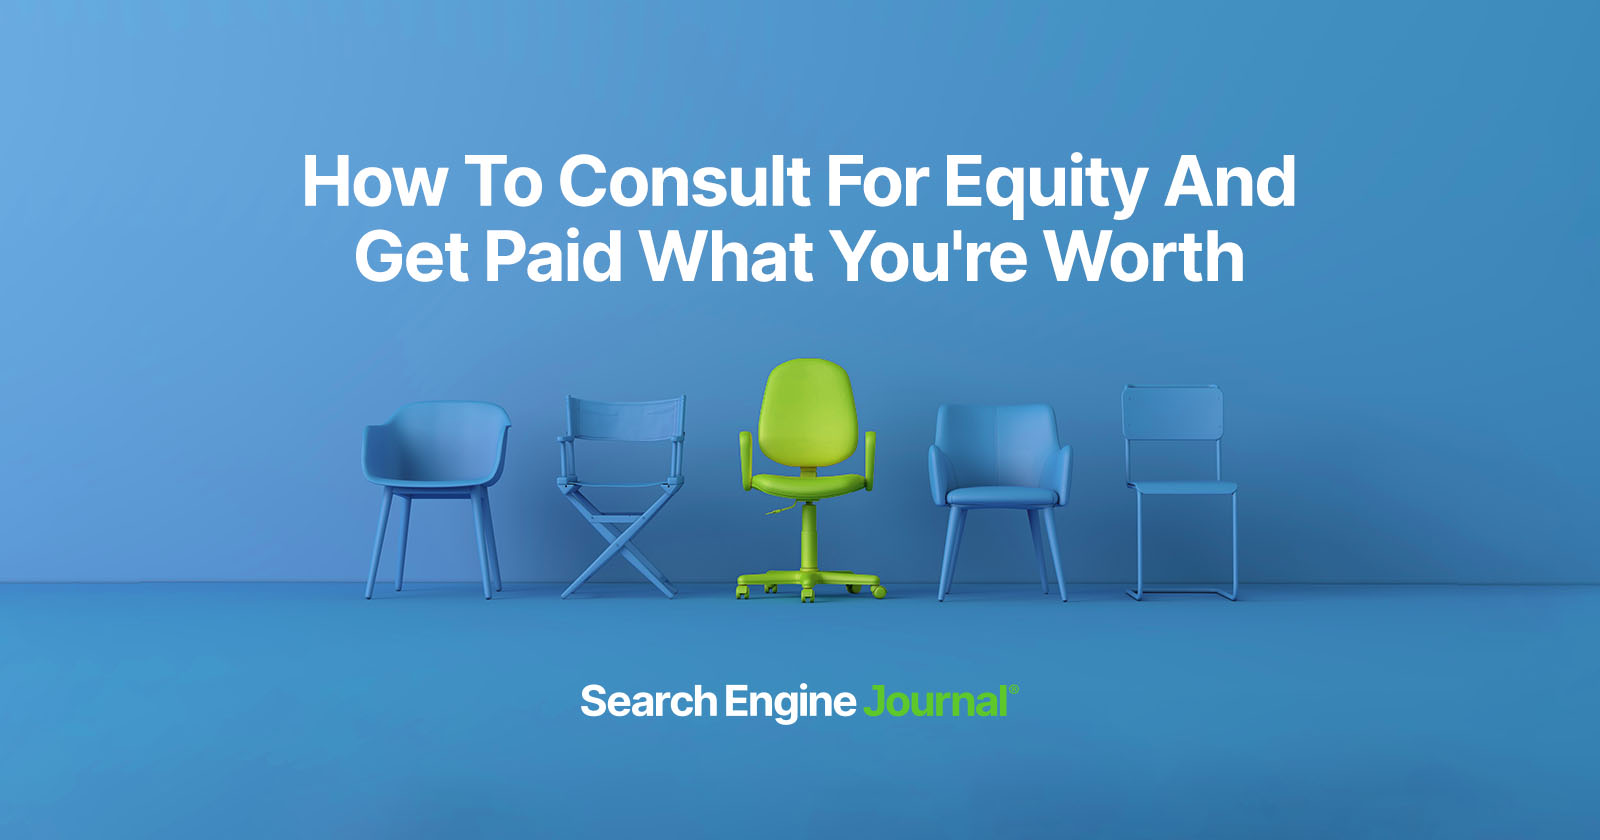 How To Consult For Equity And Get Paid What You’re Worth